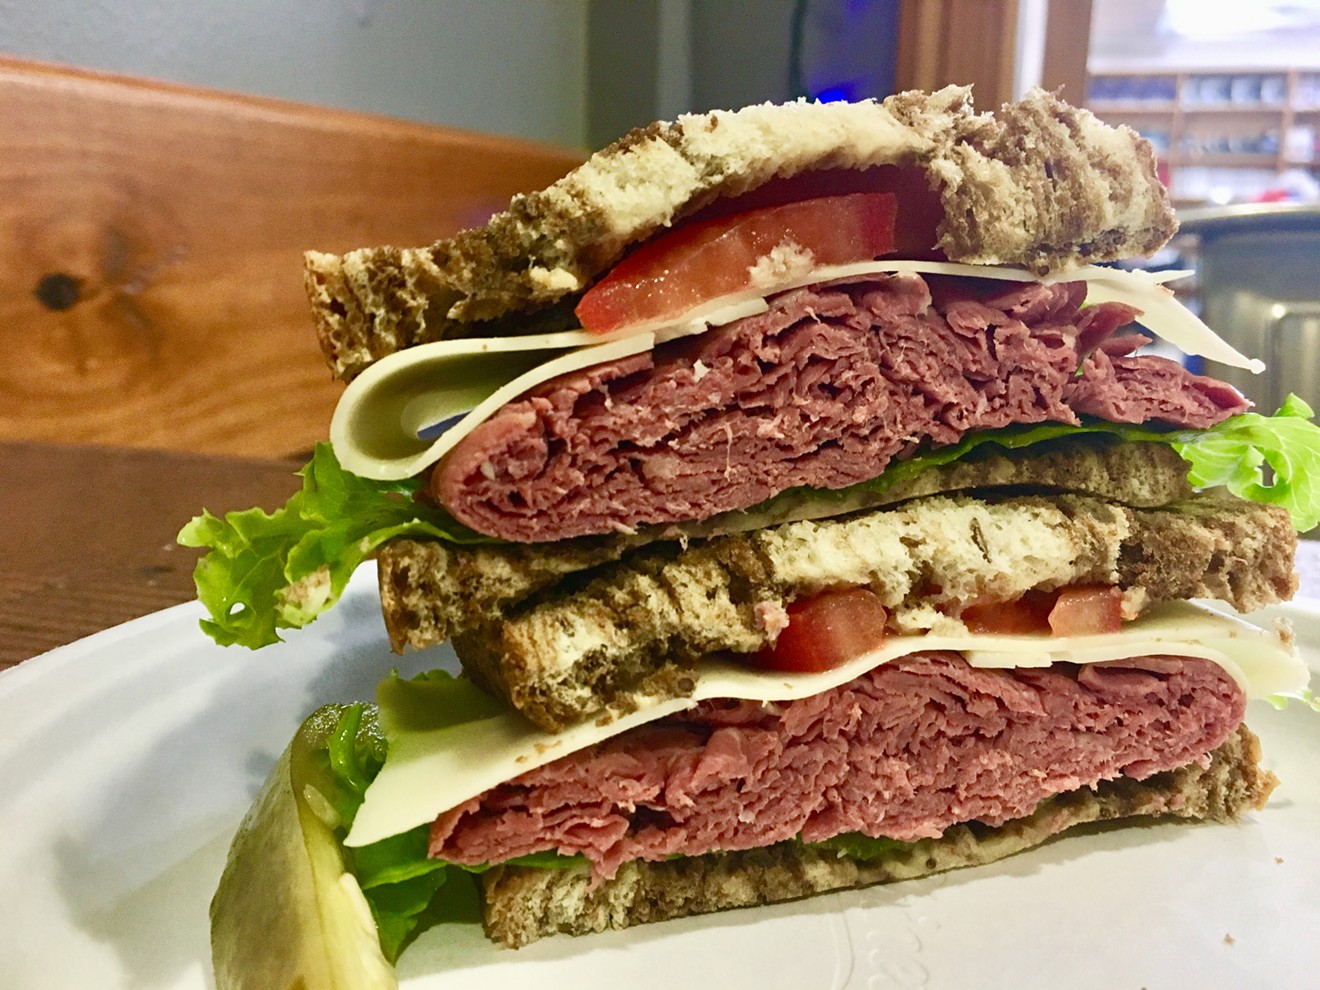 The $5.95 corned beef and Swiss cheese sandwich, with cold cuts from Henk's European Deli.